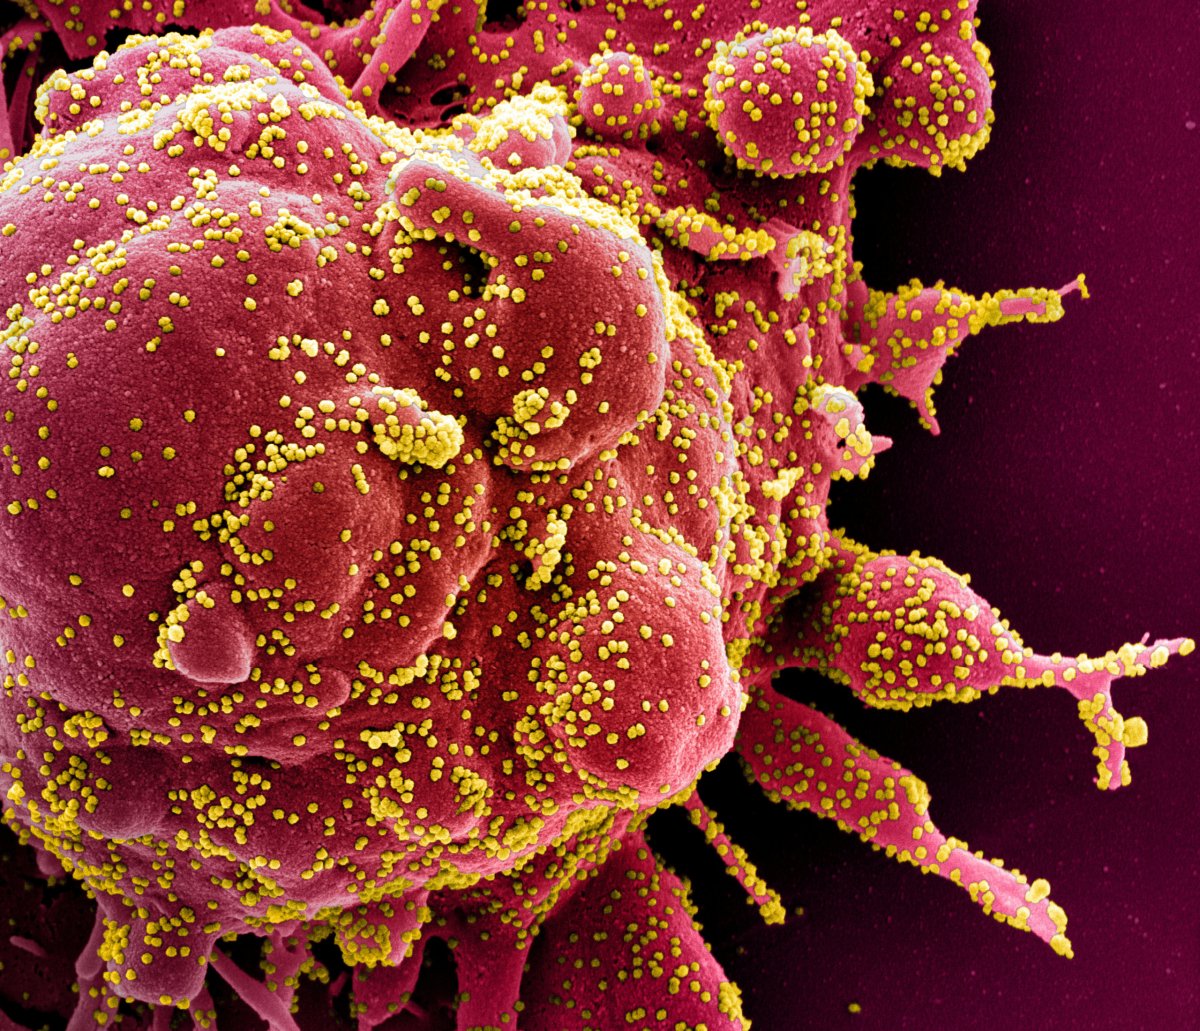 Colorized scanning electron micrograph of apoptotic cell infected with novel